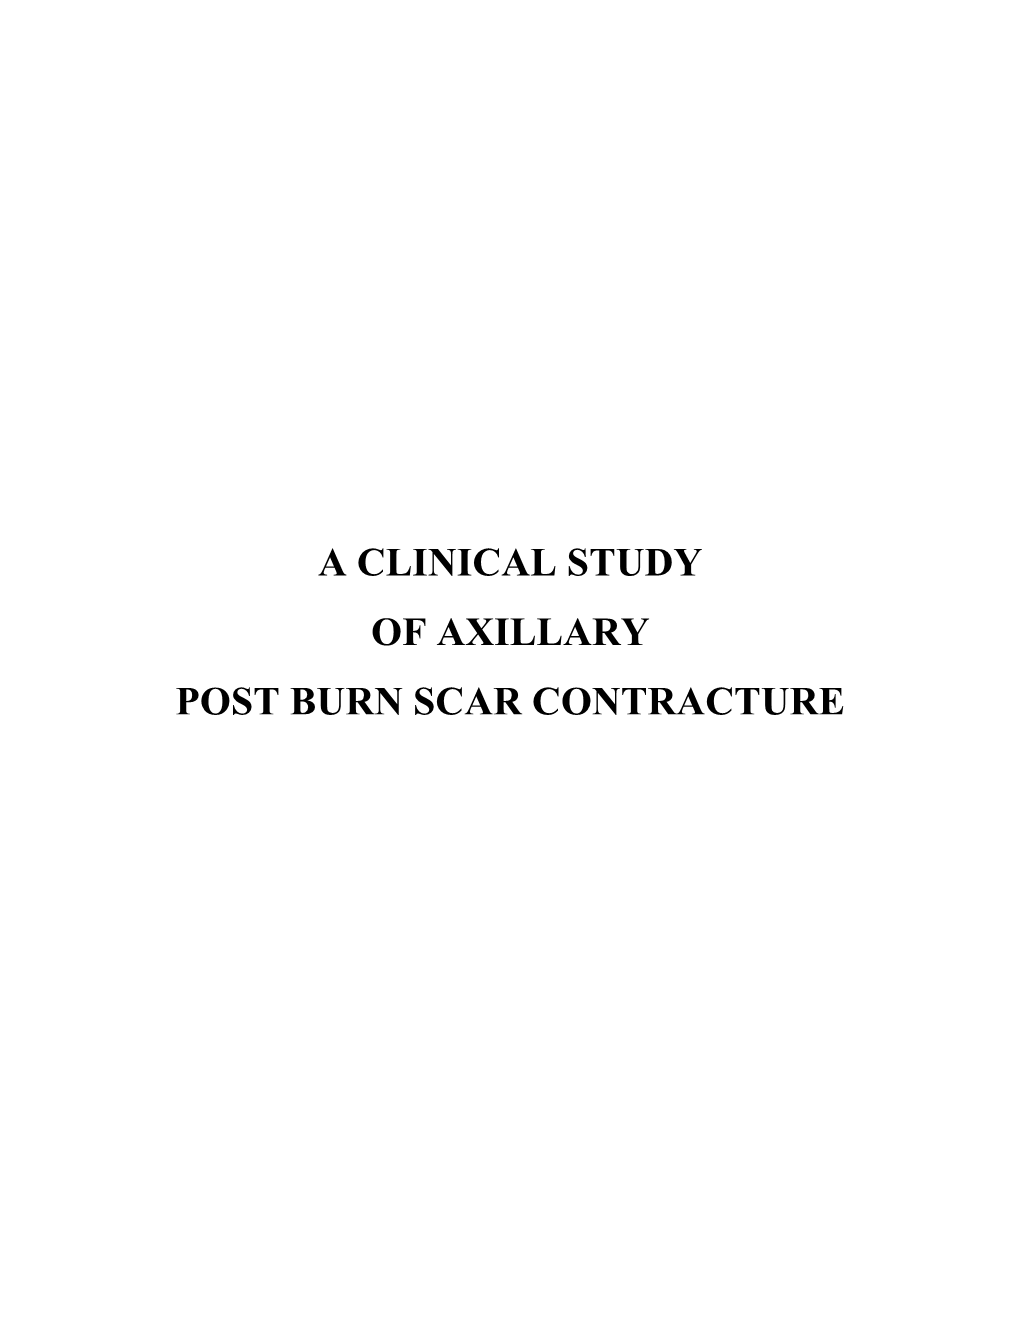 A Clinical Study of Axillary Post Burn Scar Contracture